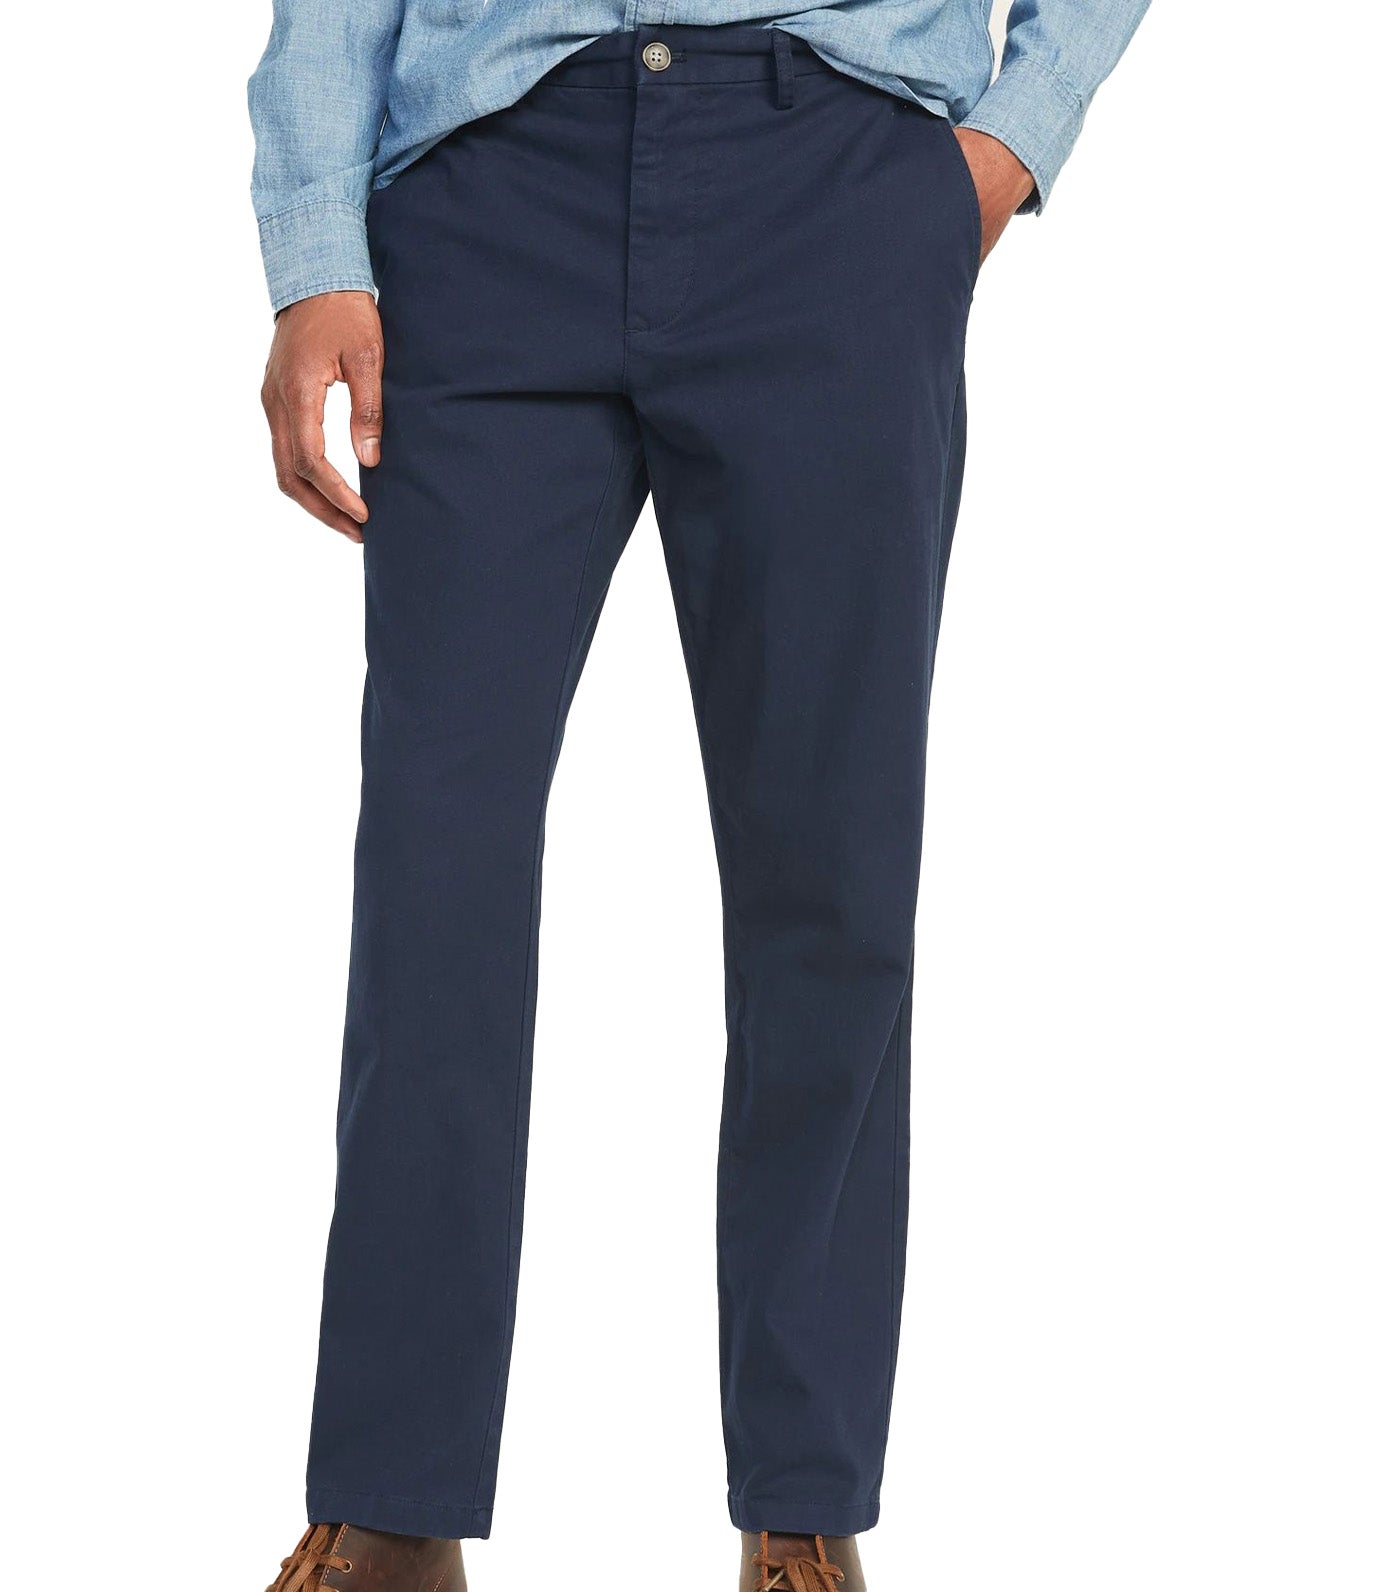 Straight Built-In Flex Rotation Chino Pants for Men In The Navy